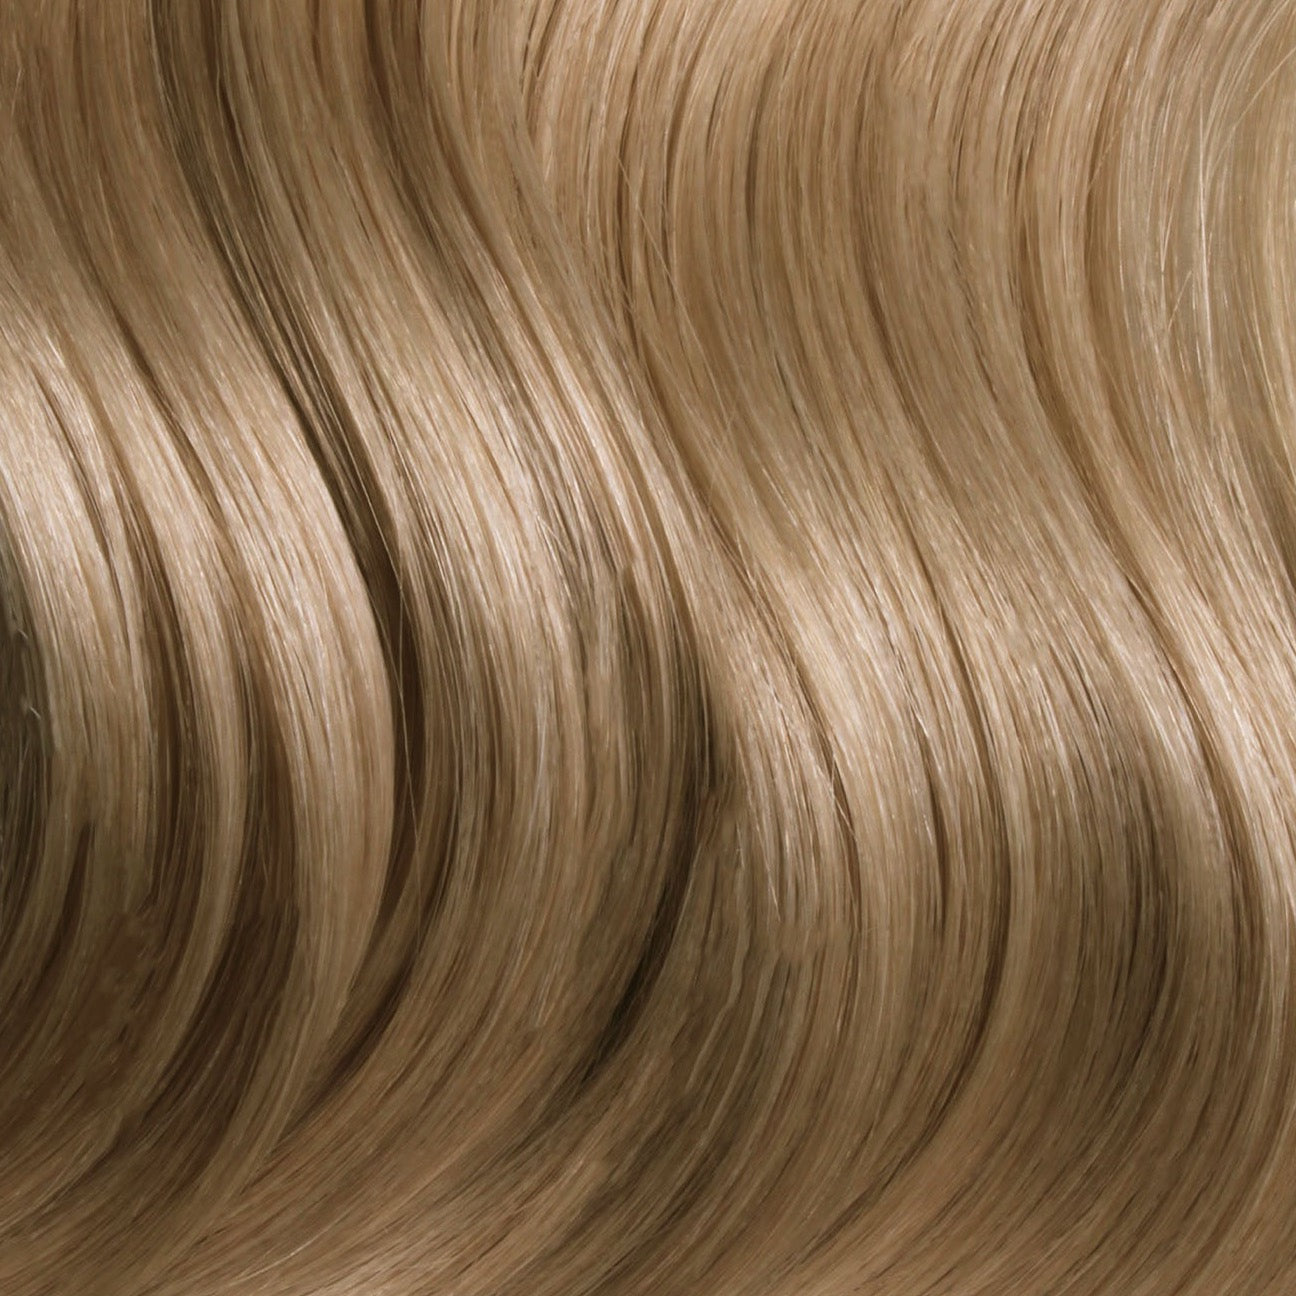 Nano Bonds 18 Inches - SWAY Hair Extensions Ash-Blondette-7-20 Ultra-fine, invisible bonds for a flawless, natural look. 100% Remy Human hair, lightweight and versatile. Reusable and perfect for individual or salon use.